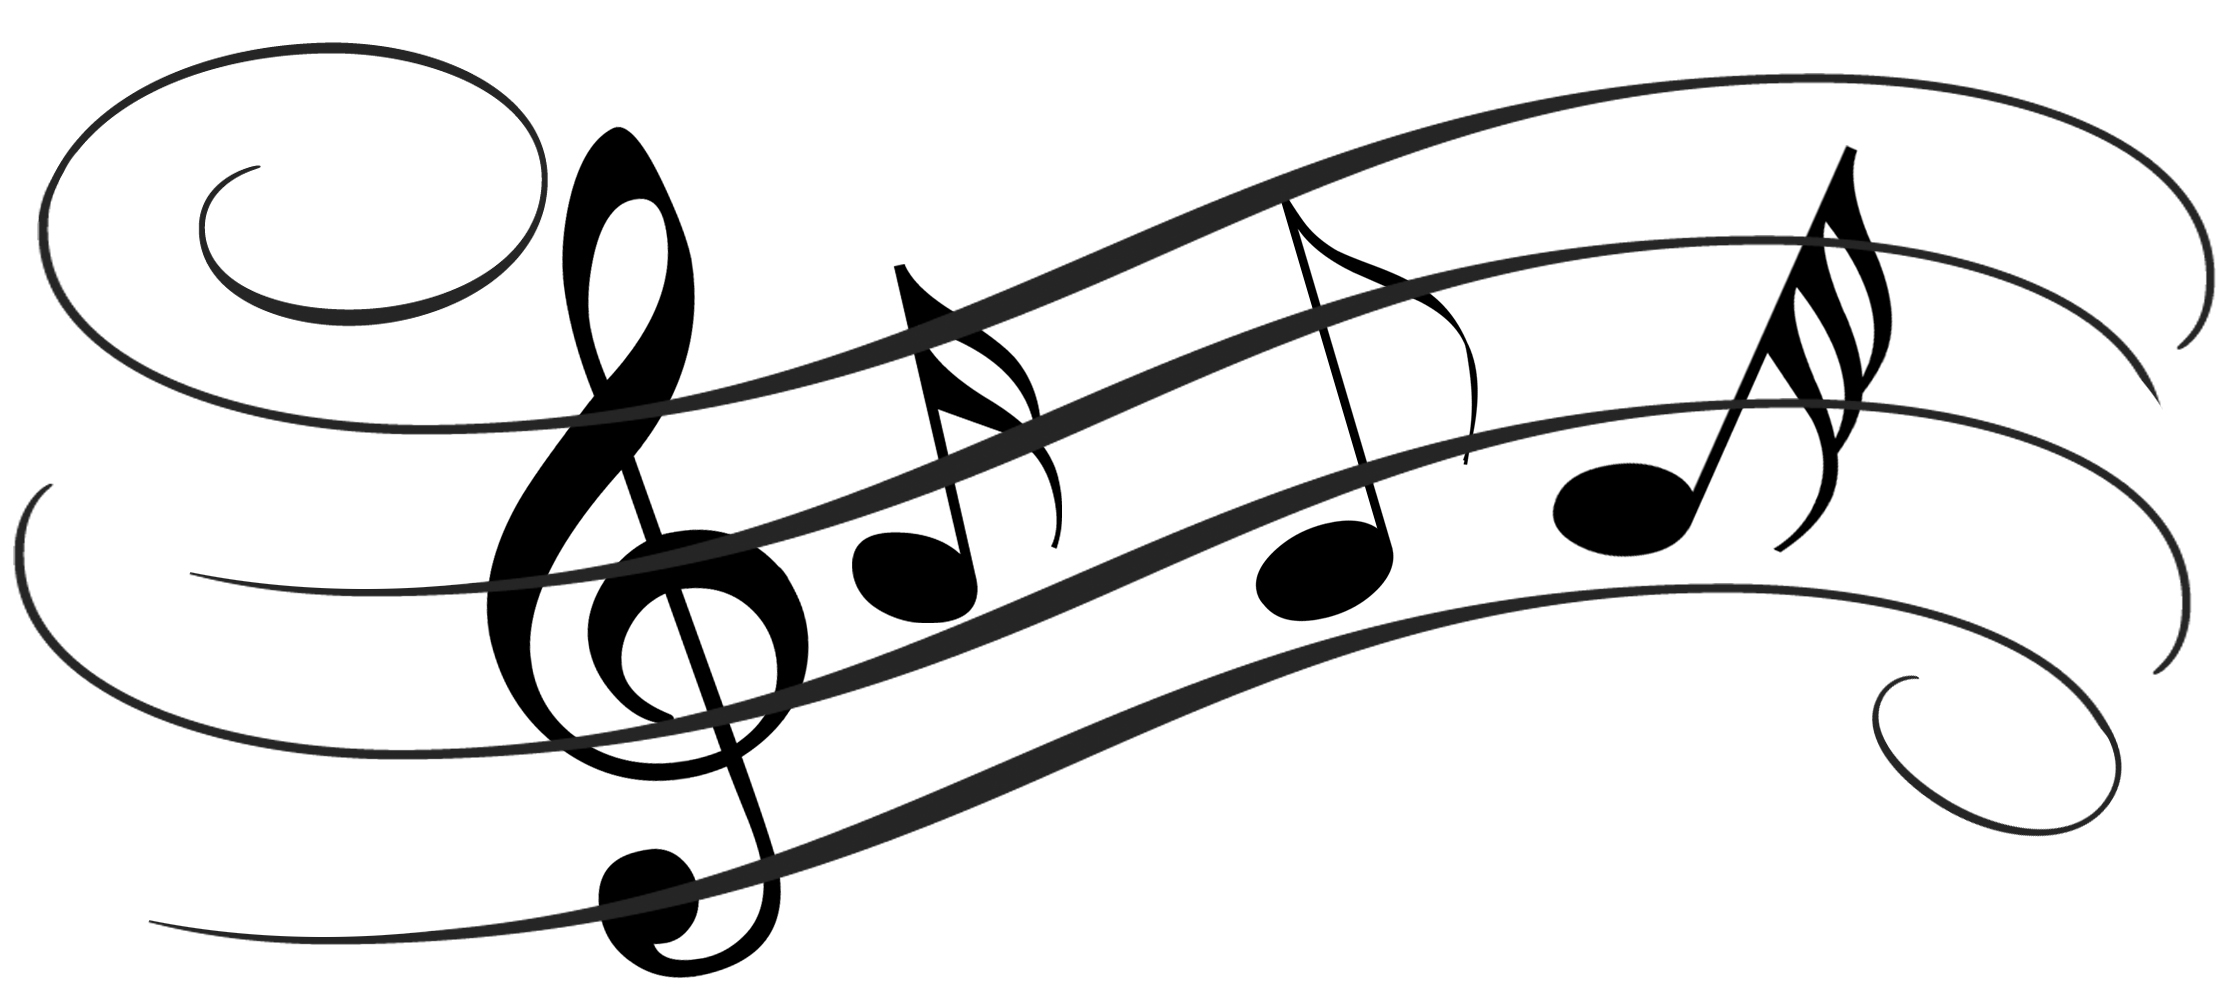 Music staff free download. Notes clipart line